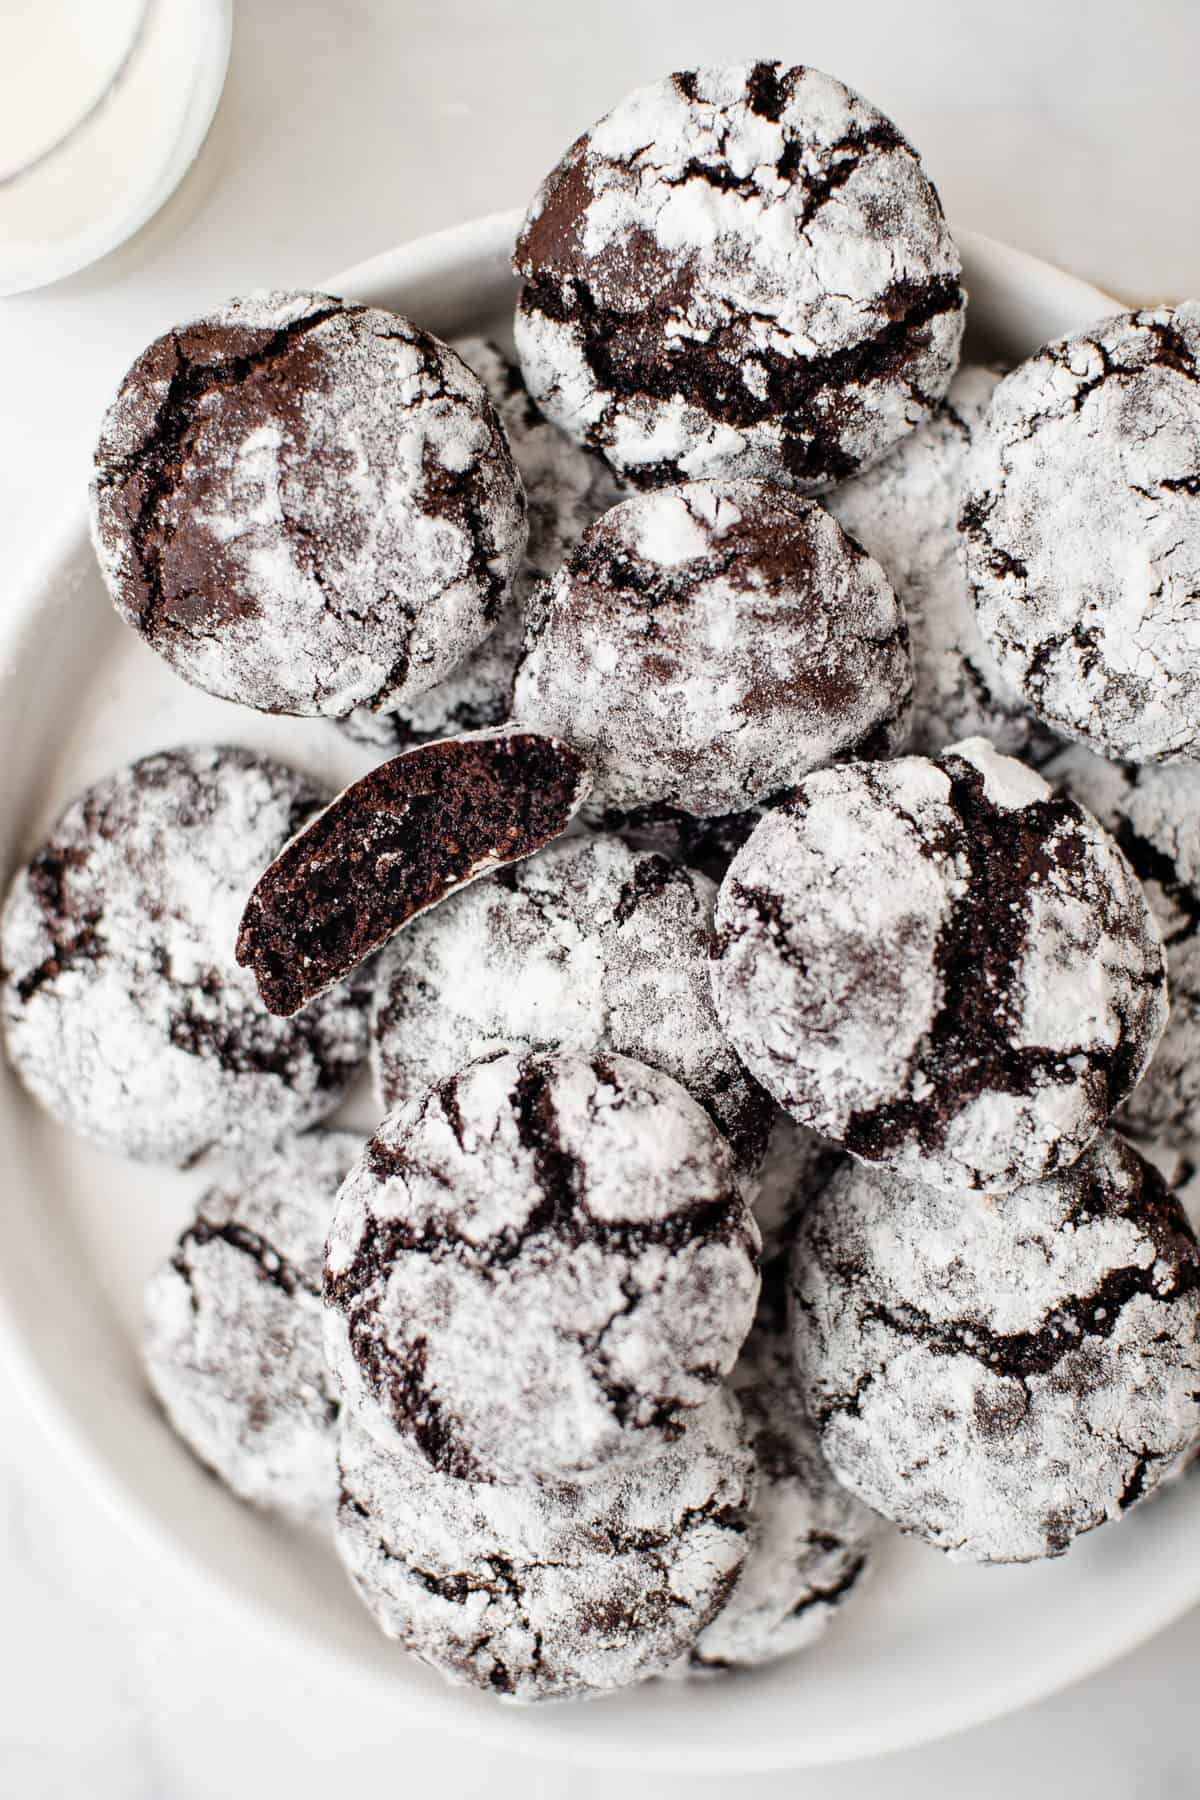 baked and finished chocolate crinkles served on a plate